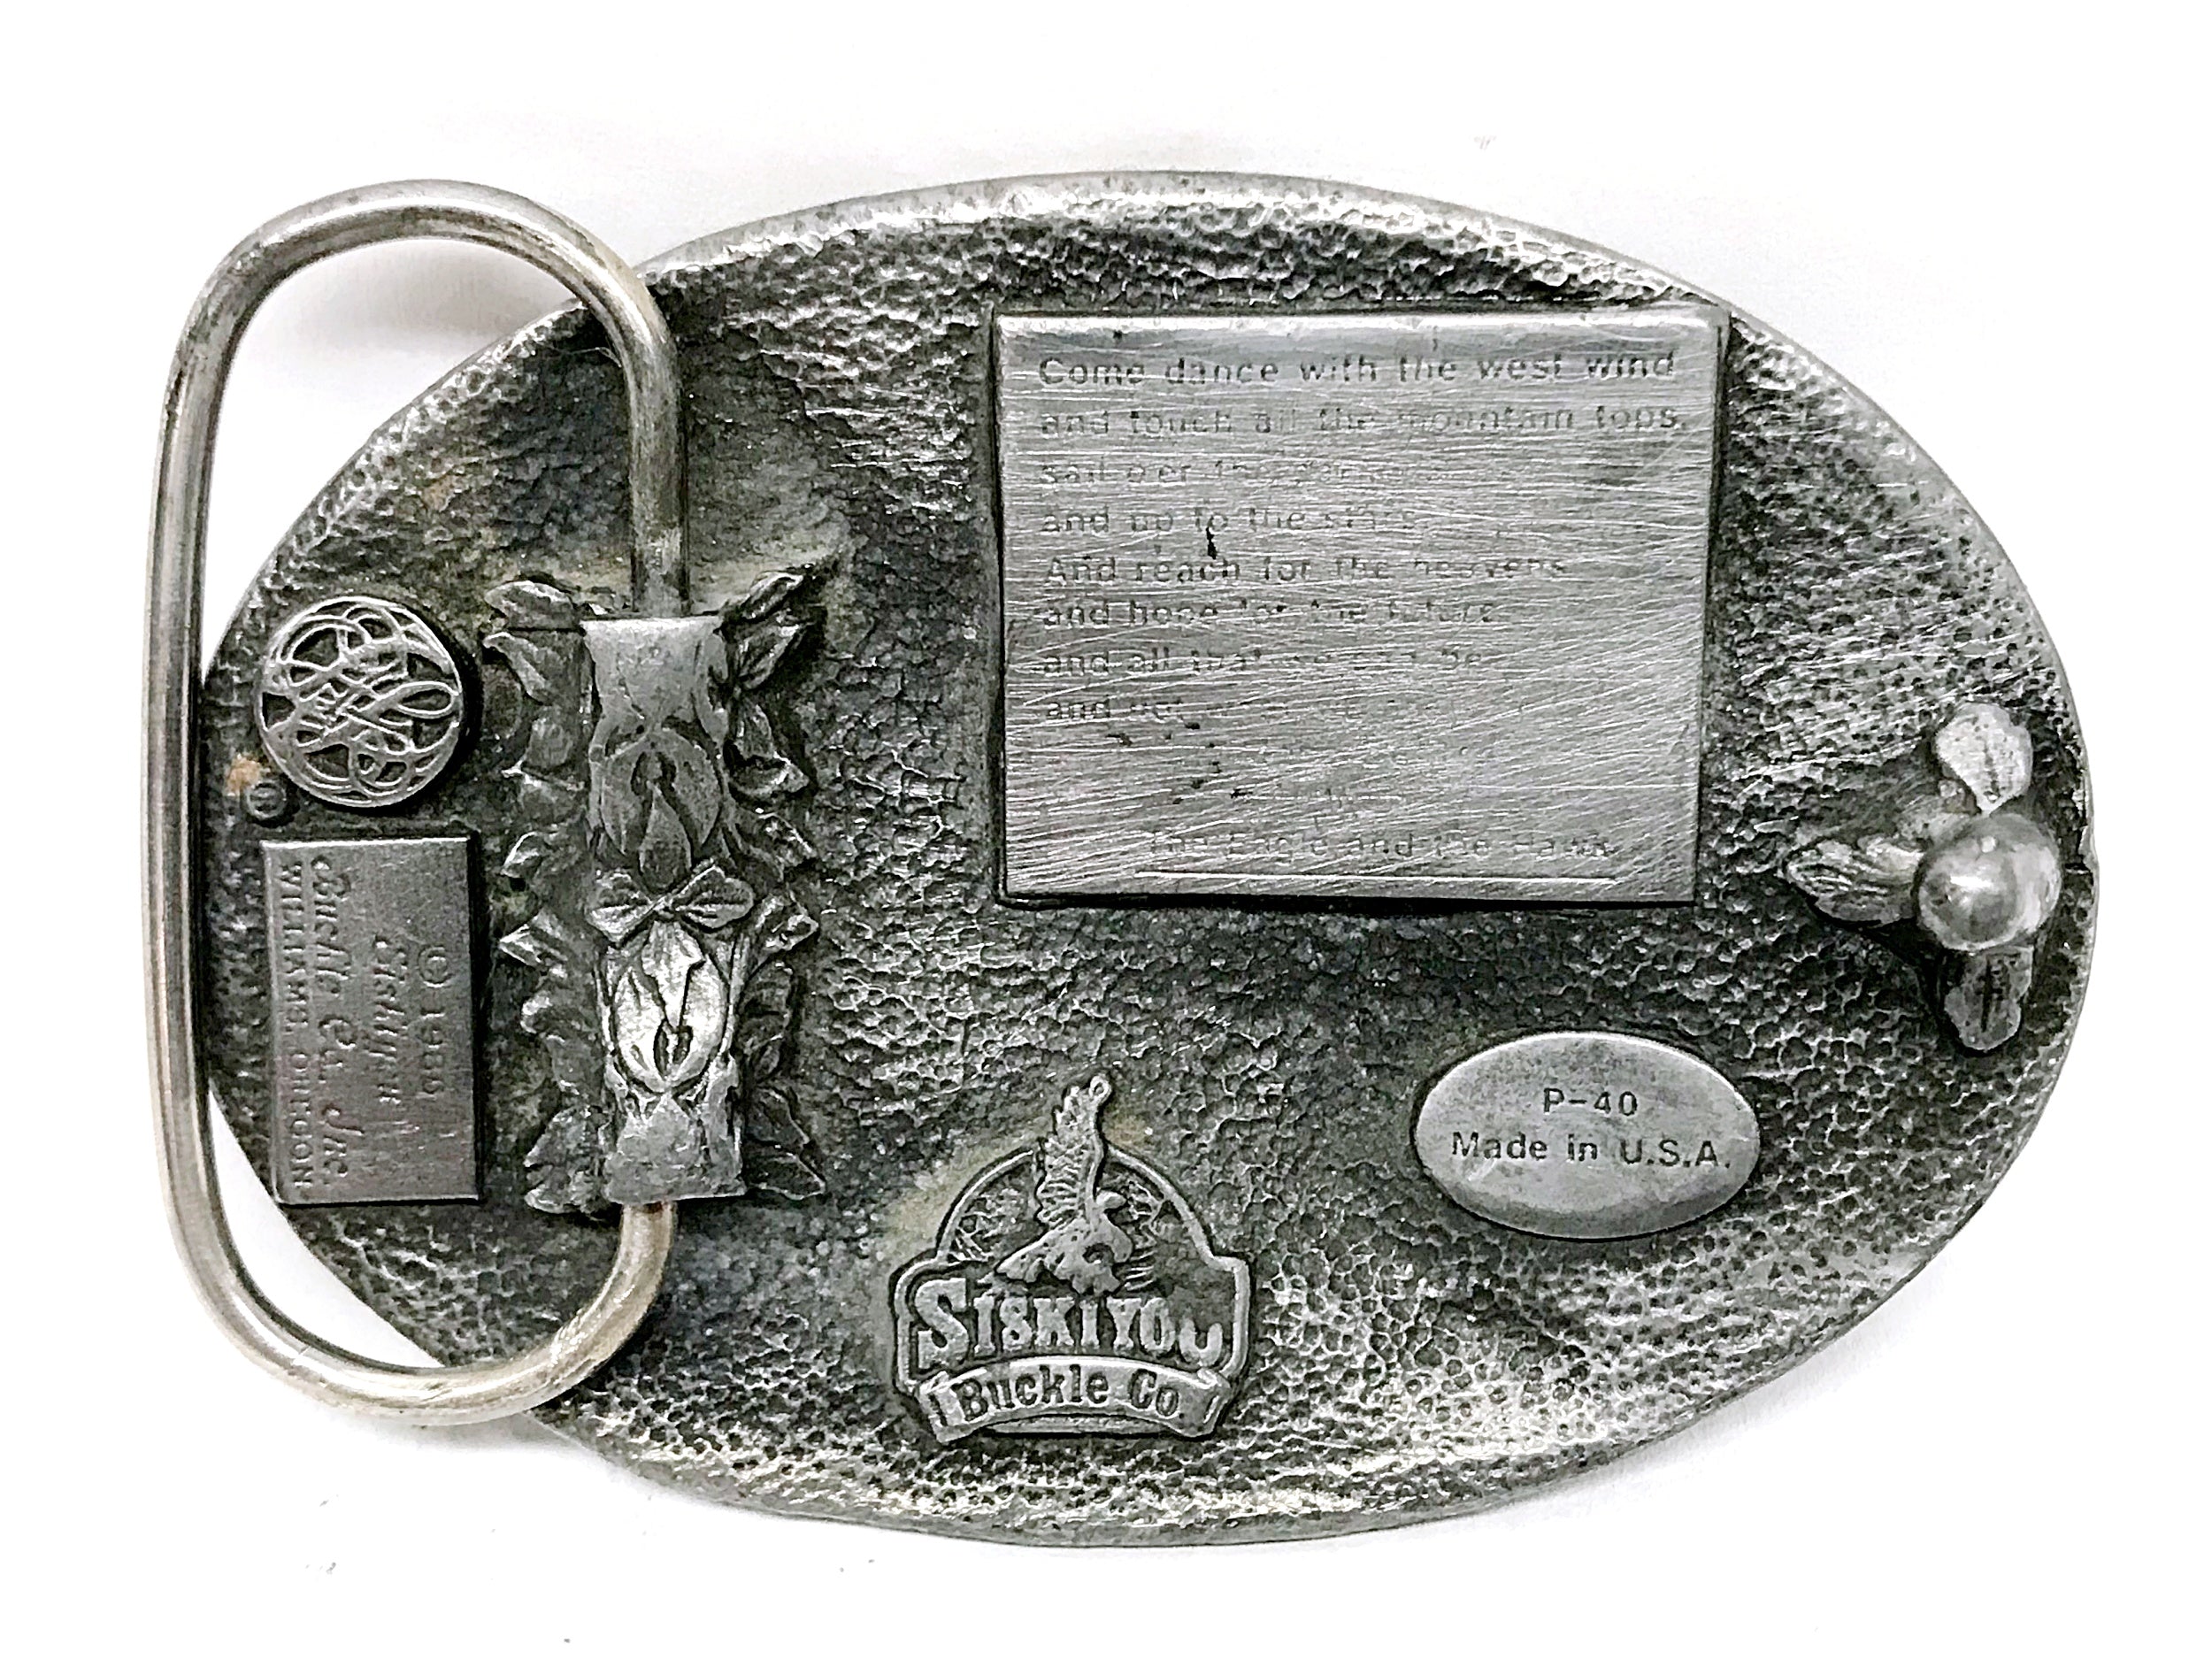 1986 Siskiyou P40 Flying Eagle and Sun Pewter Belt Buckle | USA